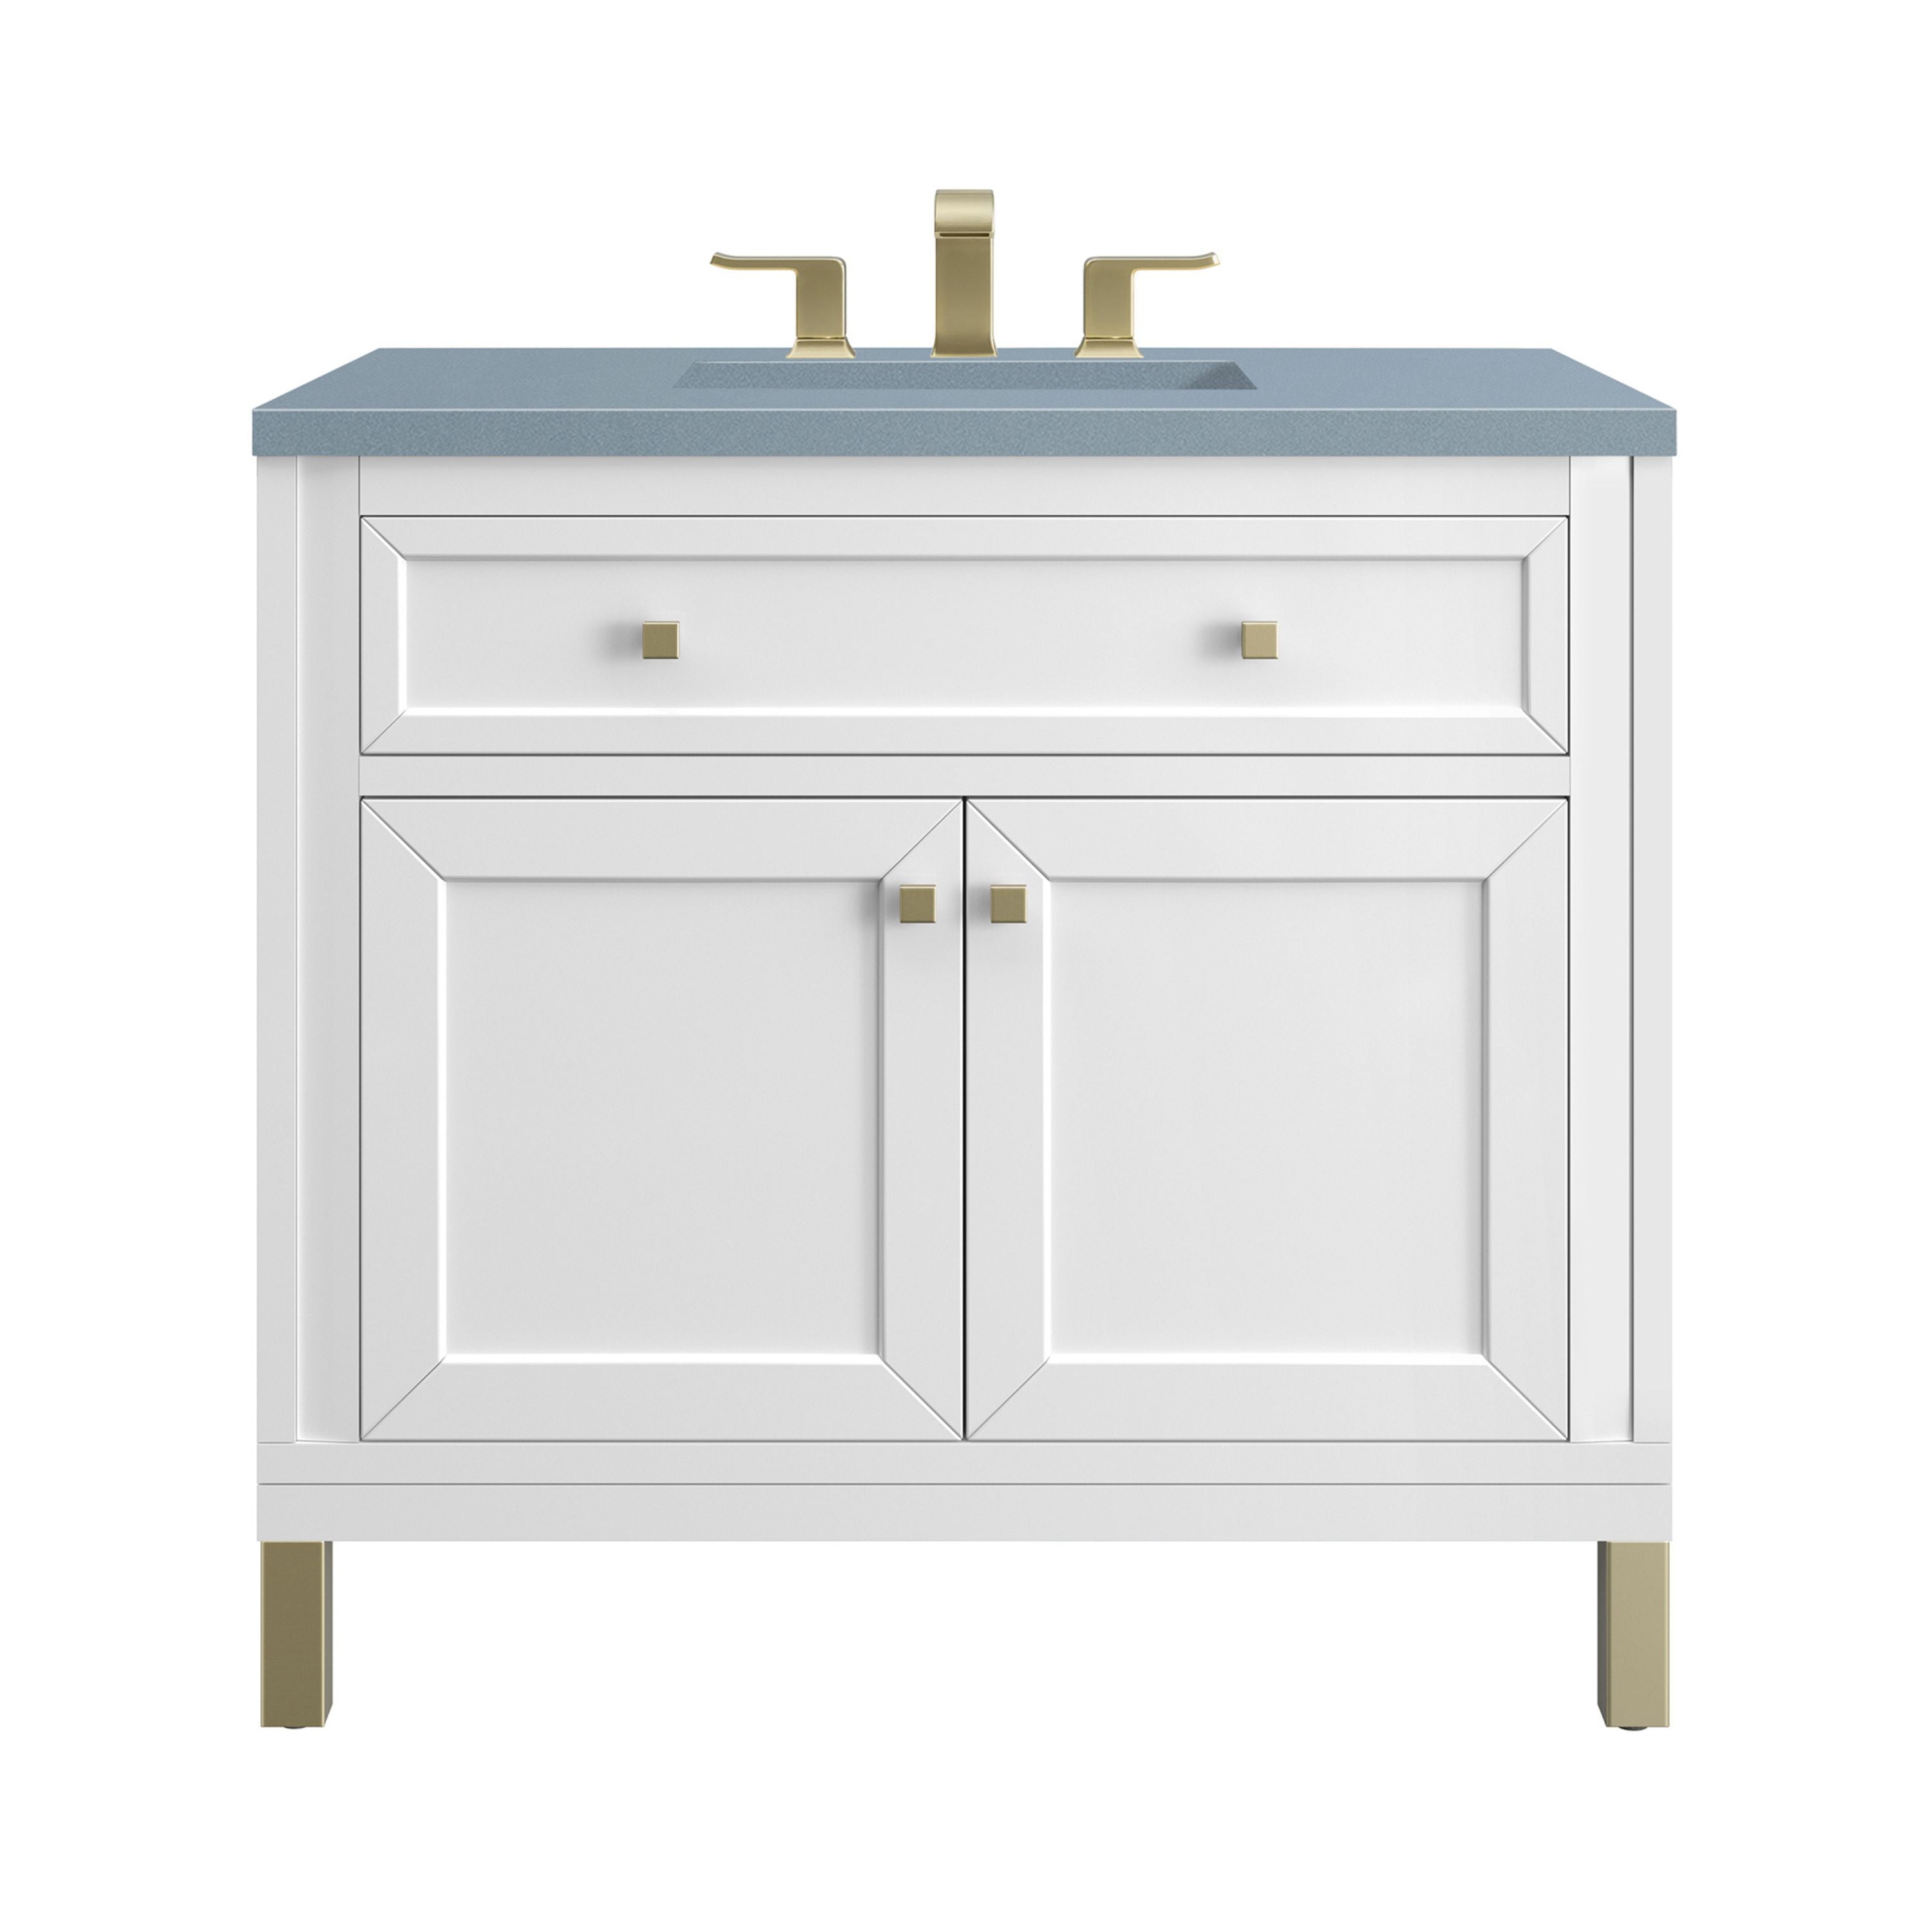 James Martin Vanities Chicago Collection 36 in. Single Vanity in Glossy White with Countertop Options